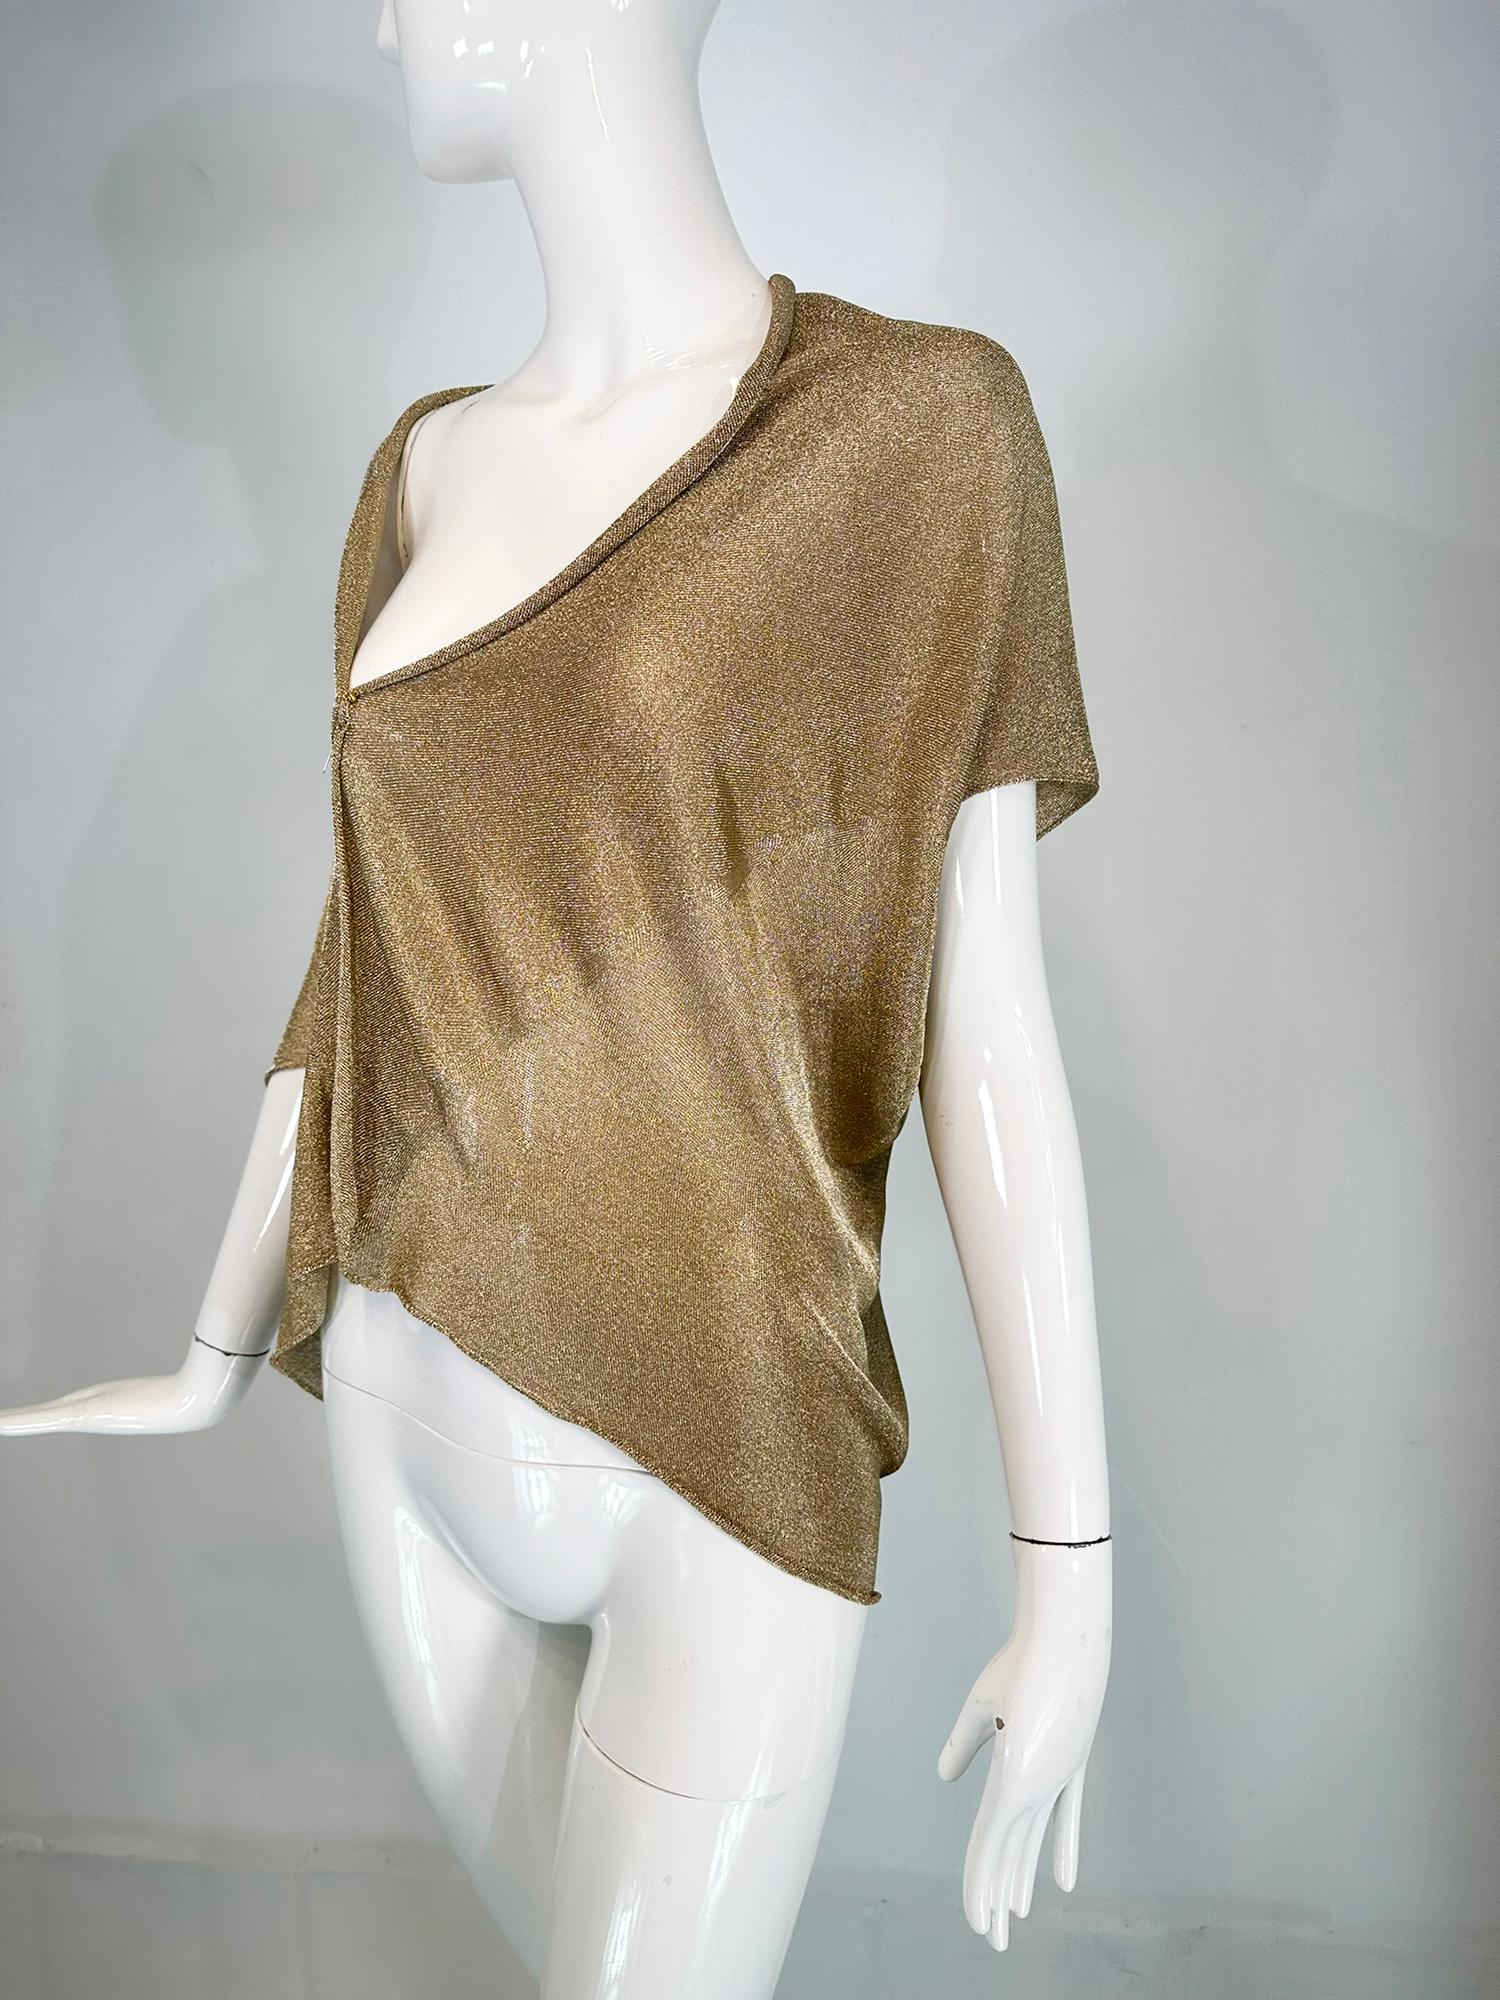 Alberta Ferretti gold metallic knit asymmetrical, cropped, draped, sleeveless, layering shrug. New with tags, this versatile piece is a perfect add to any outfit from evening to day wear. Unworn with tags. 
In excellent wearable condition.  All our